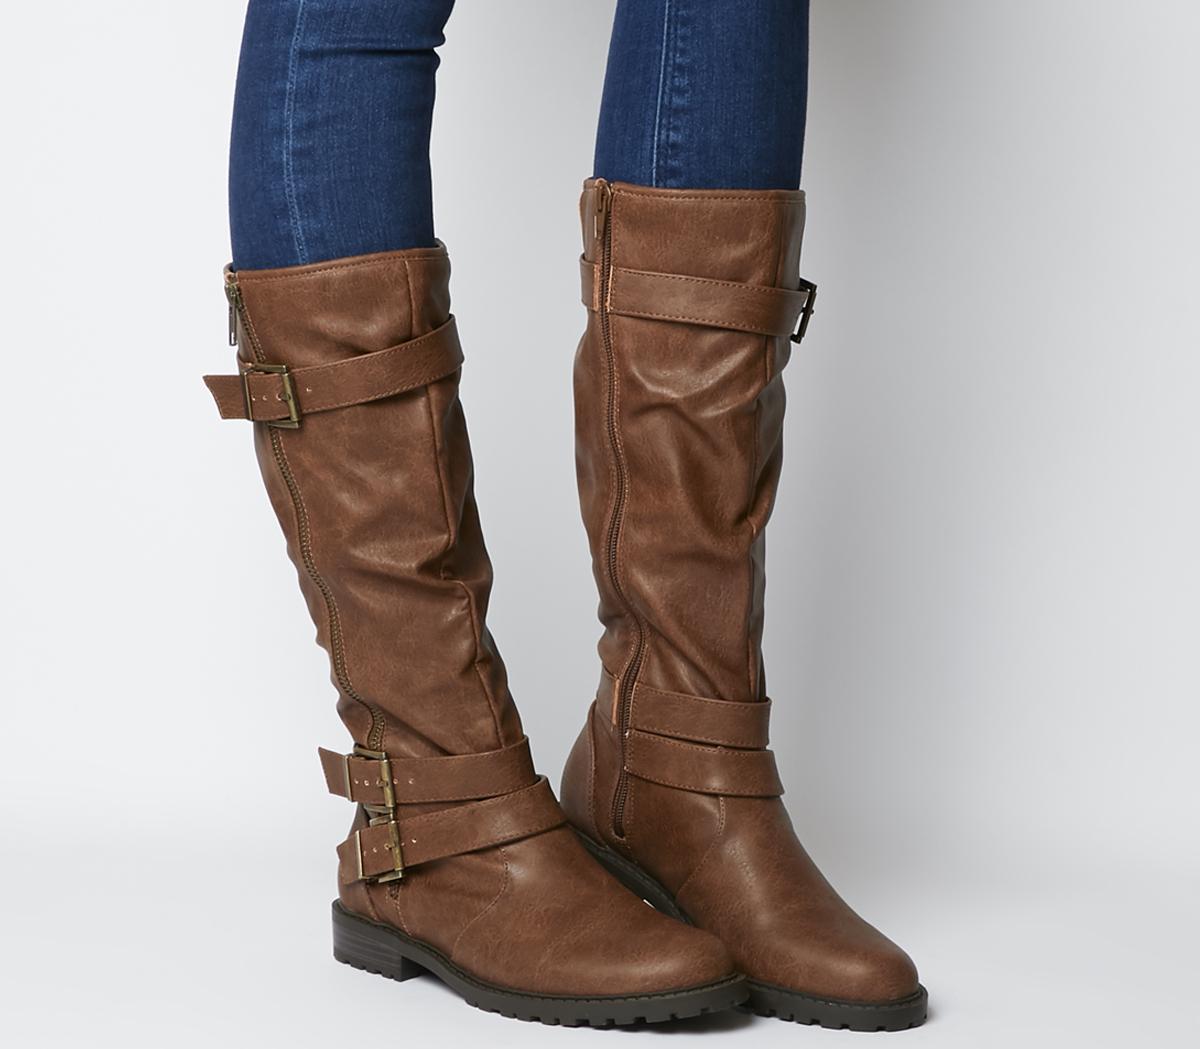 comfortable knee high boots